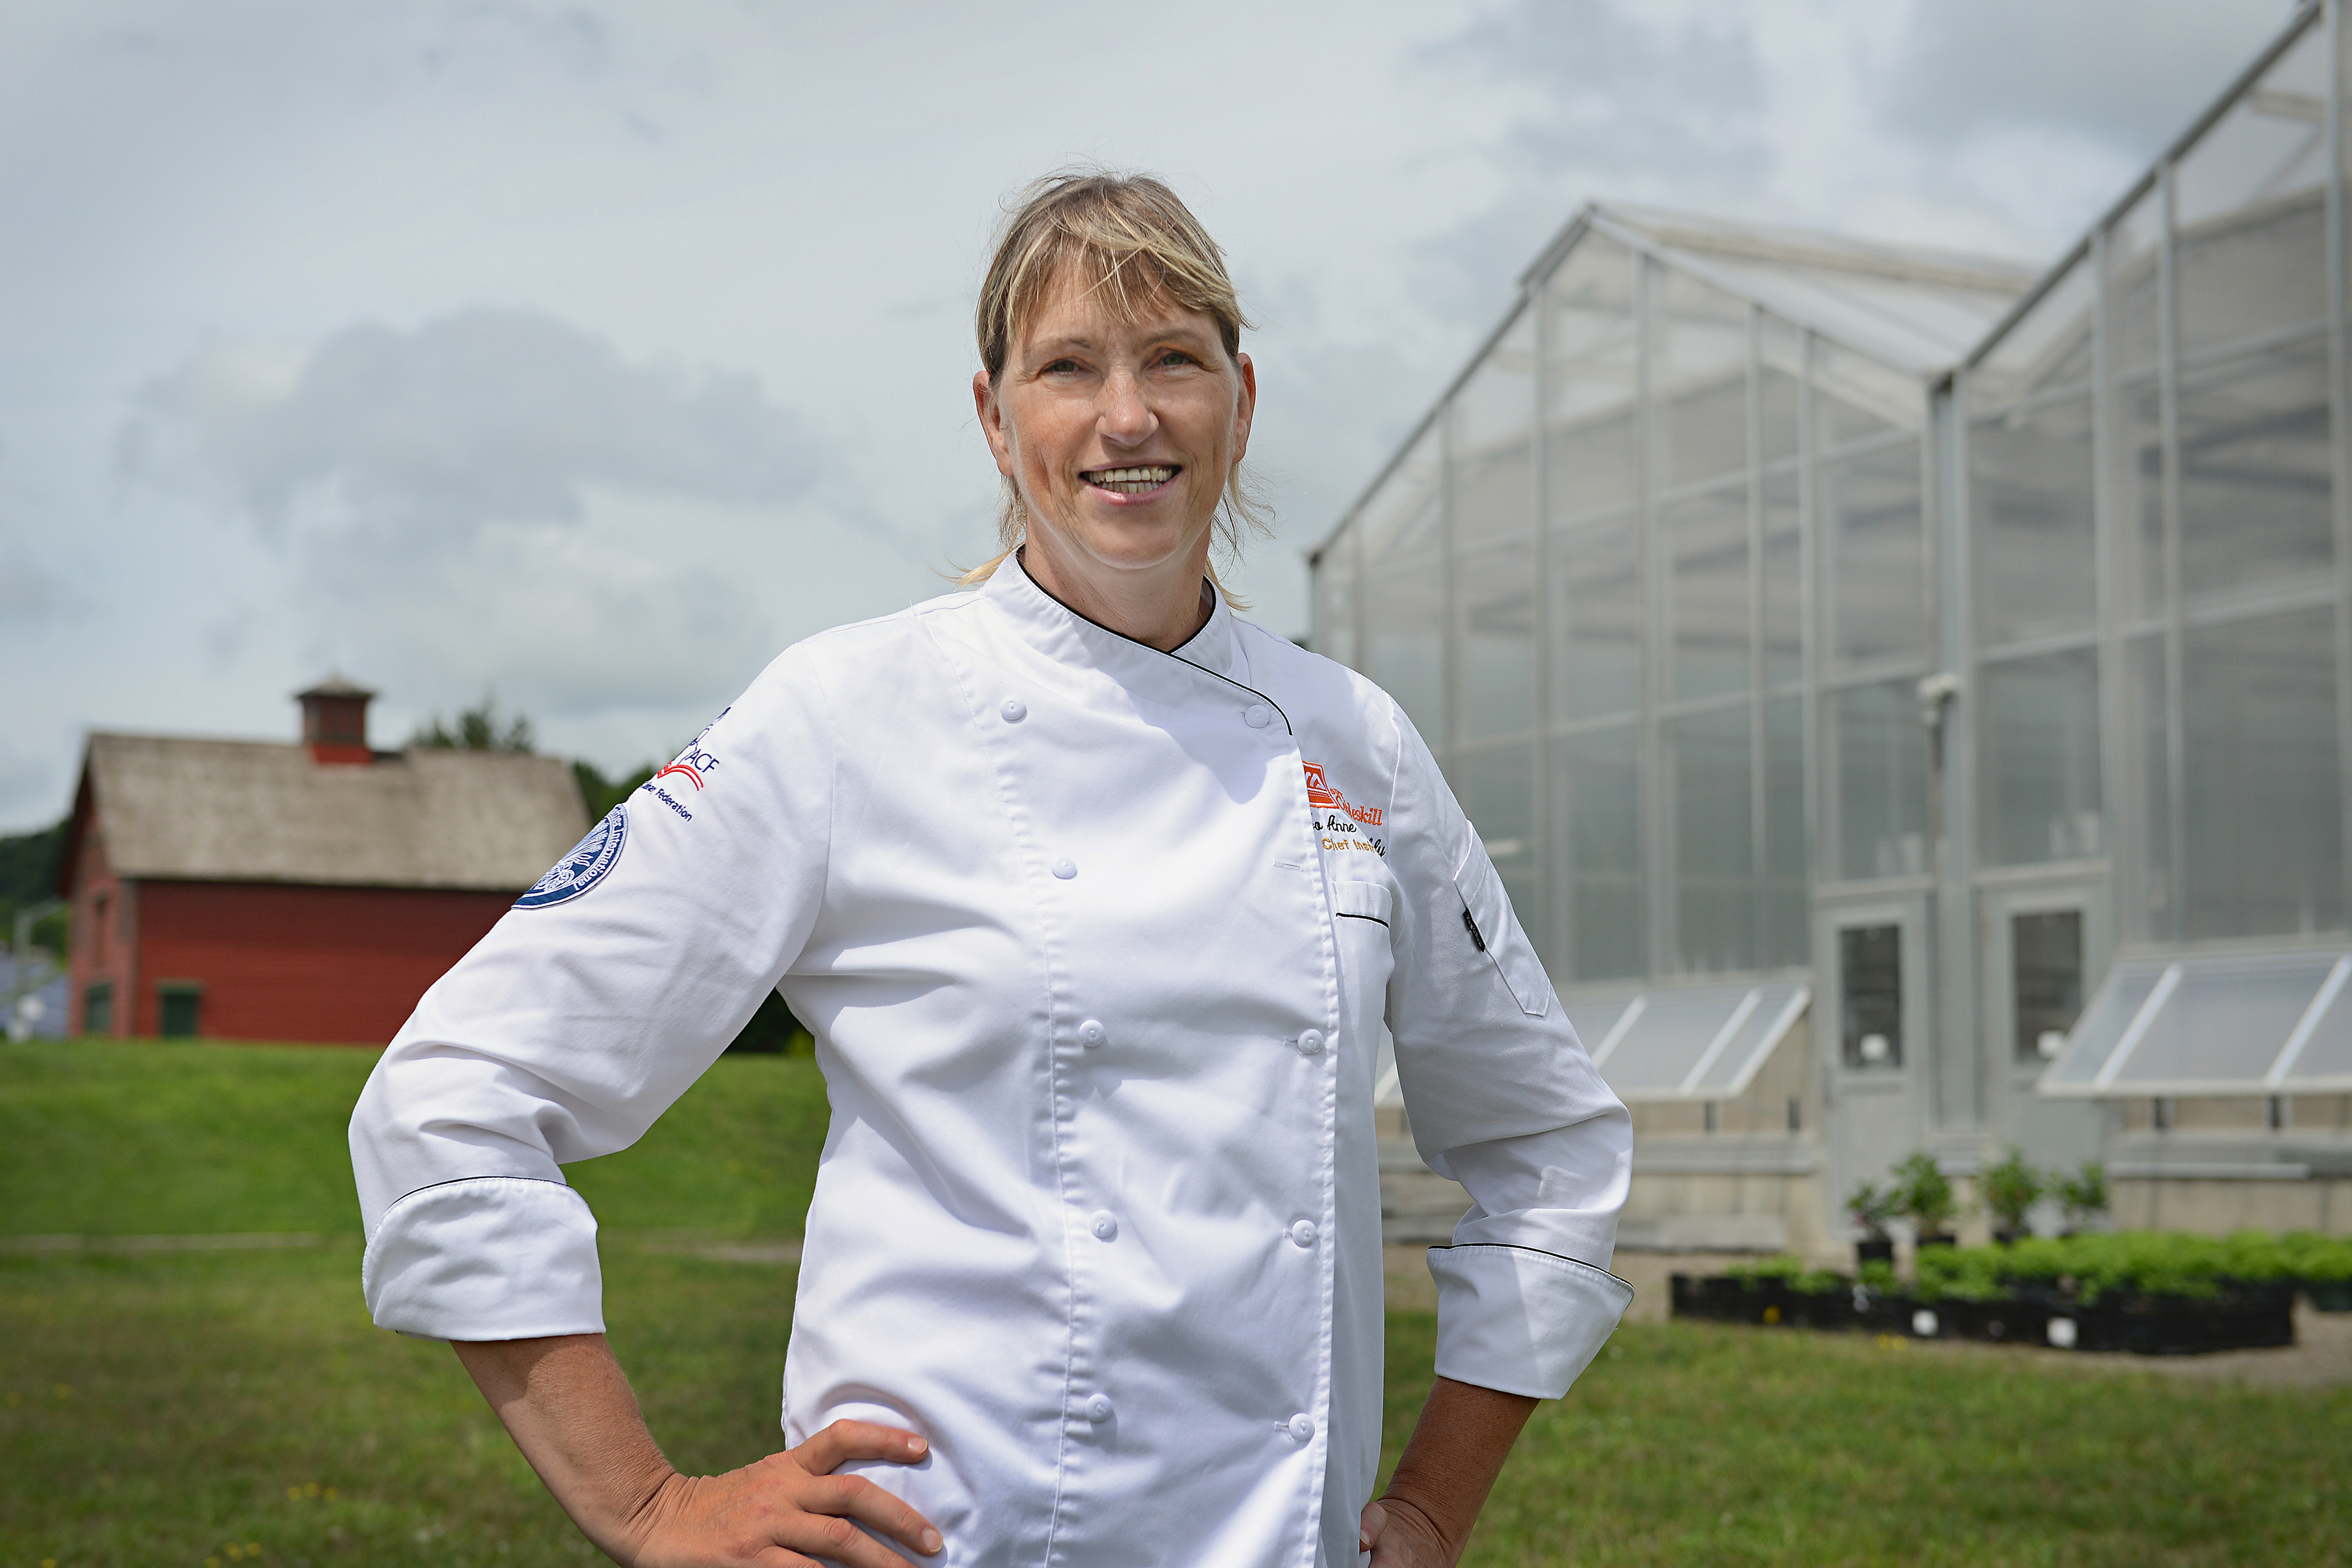 A certified executive pastry chef, JoAnne Cloughly is chair of SUNY Cobleskill’s Agricultural Business and Food Management program